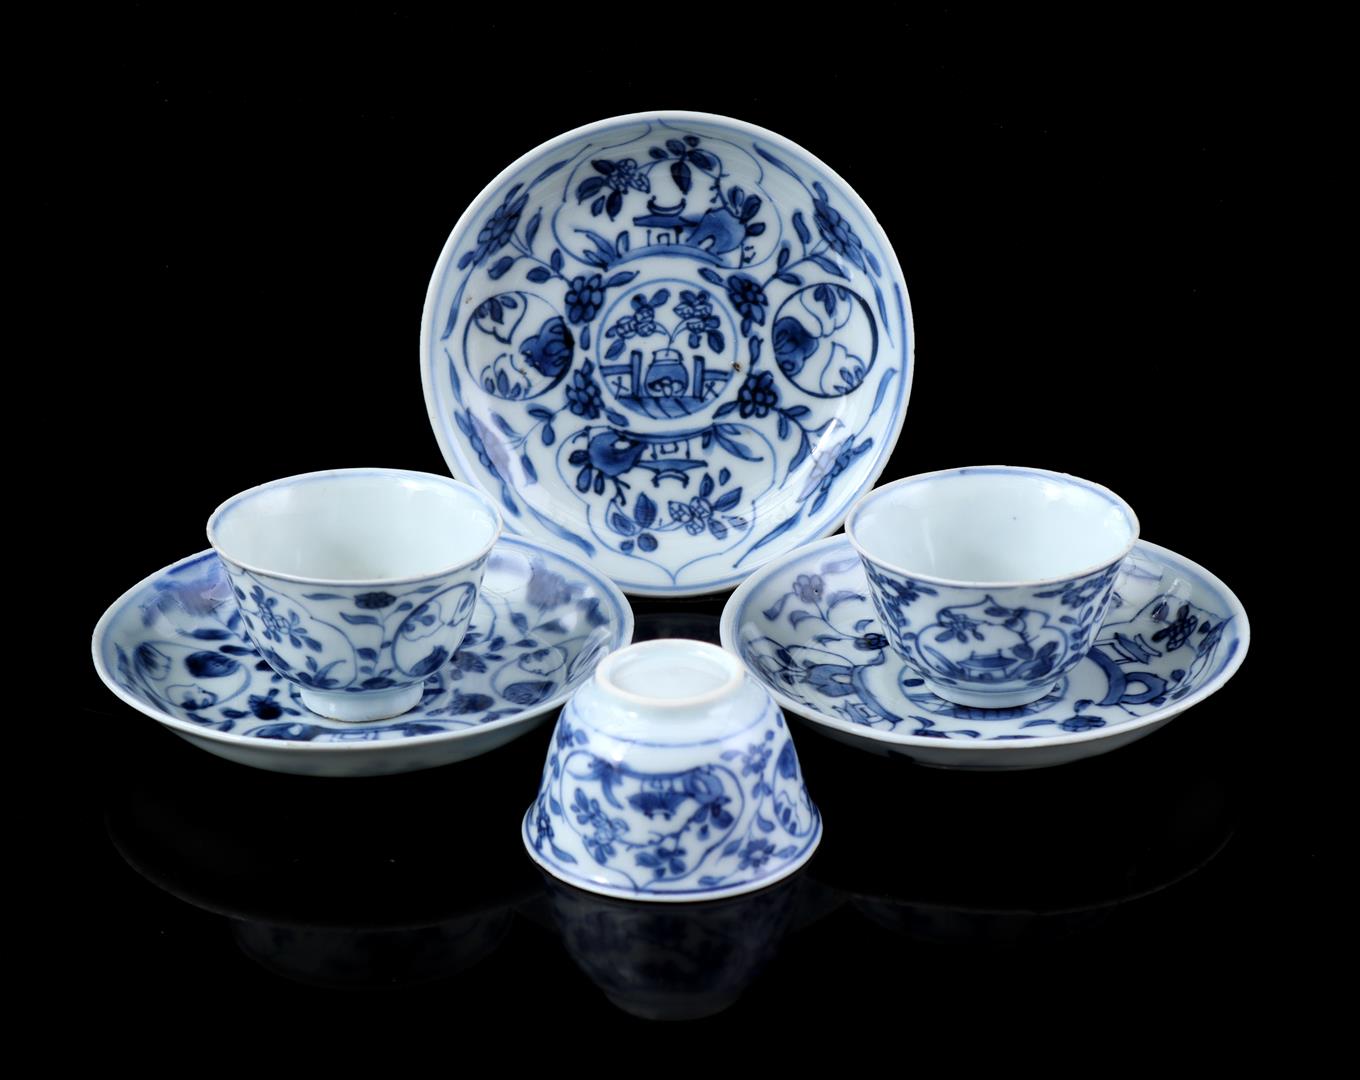 3 porcelain cups and saucers, Yongzheng